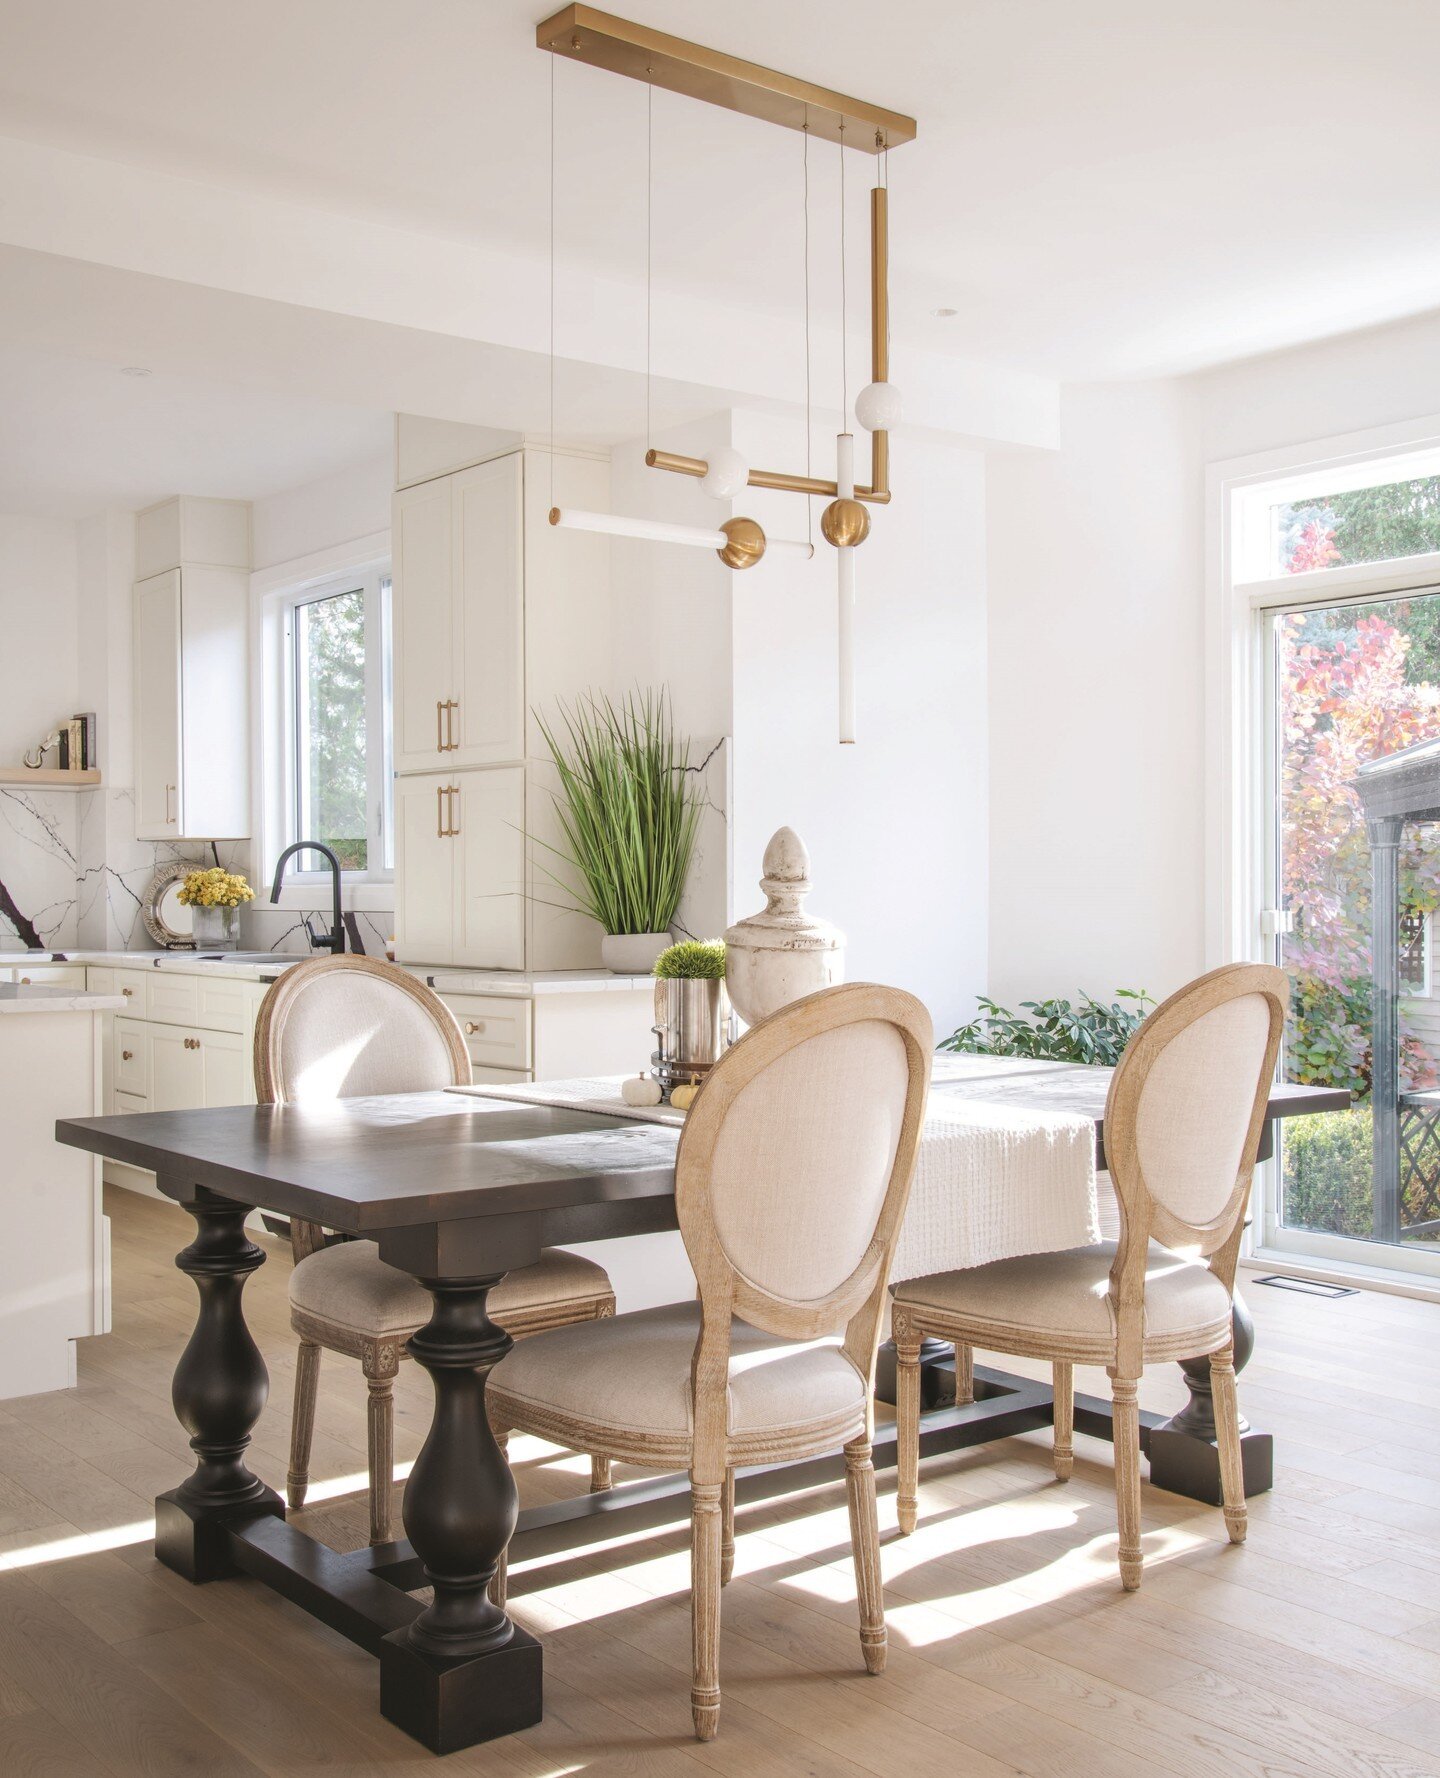 The dining table is close to the kitchen in this open concept remodelled home. Design details abound including the simple but impactful light fixtures. Ready for the dinner parties!⁠
⁠
Photo: Gordon King⁠
Design and Renovation: Terzetto Homes @terzet